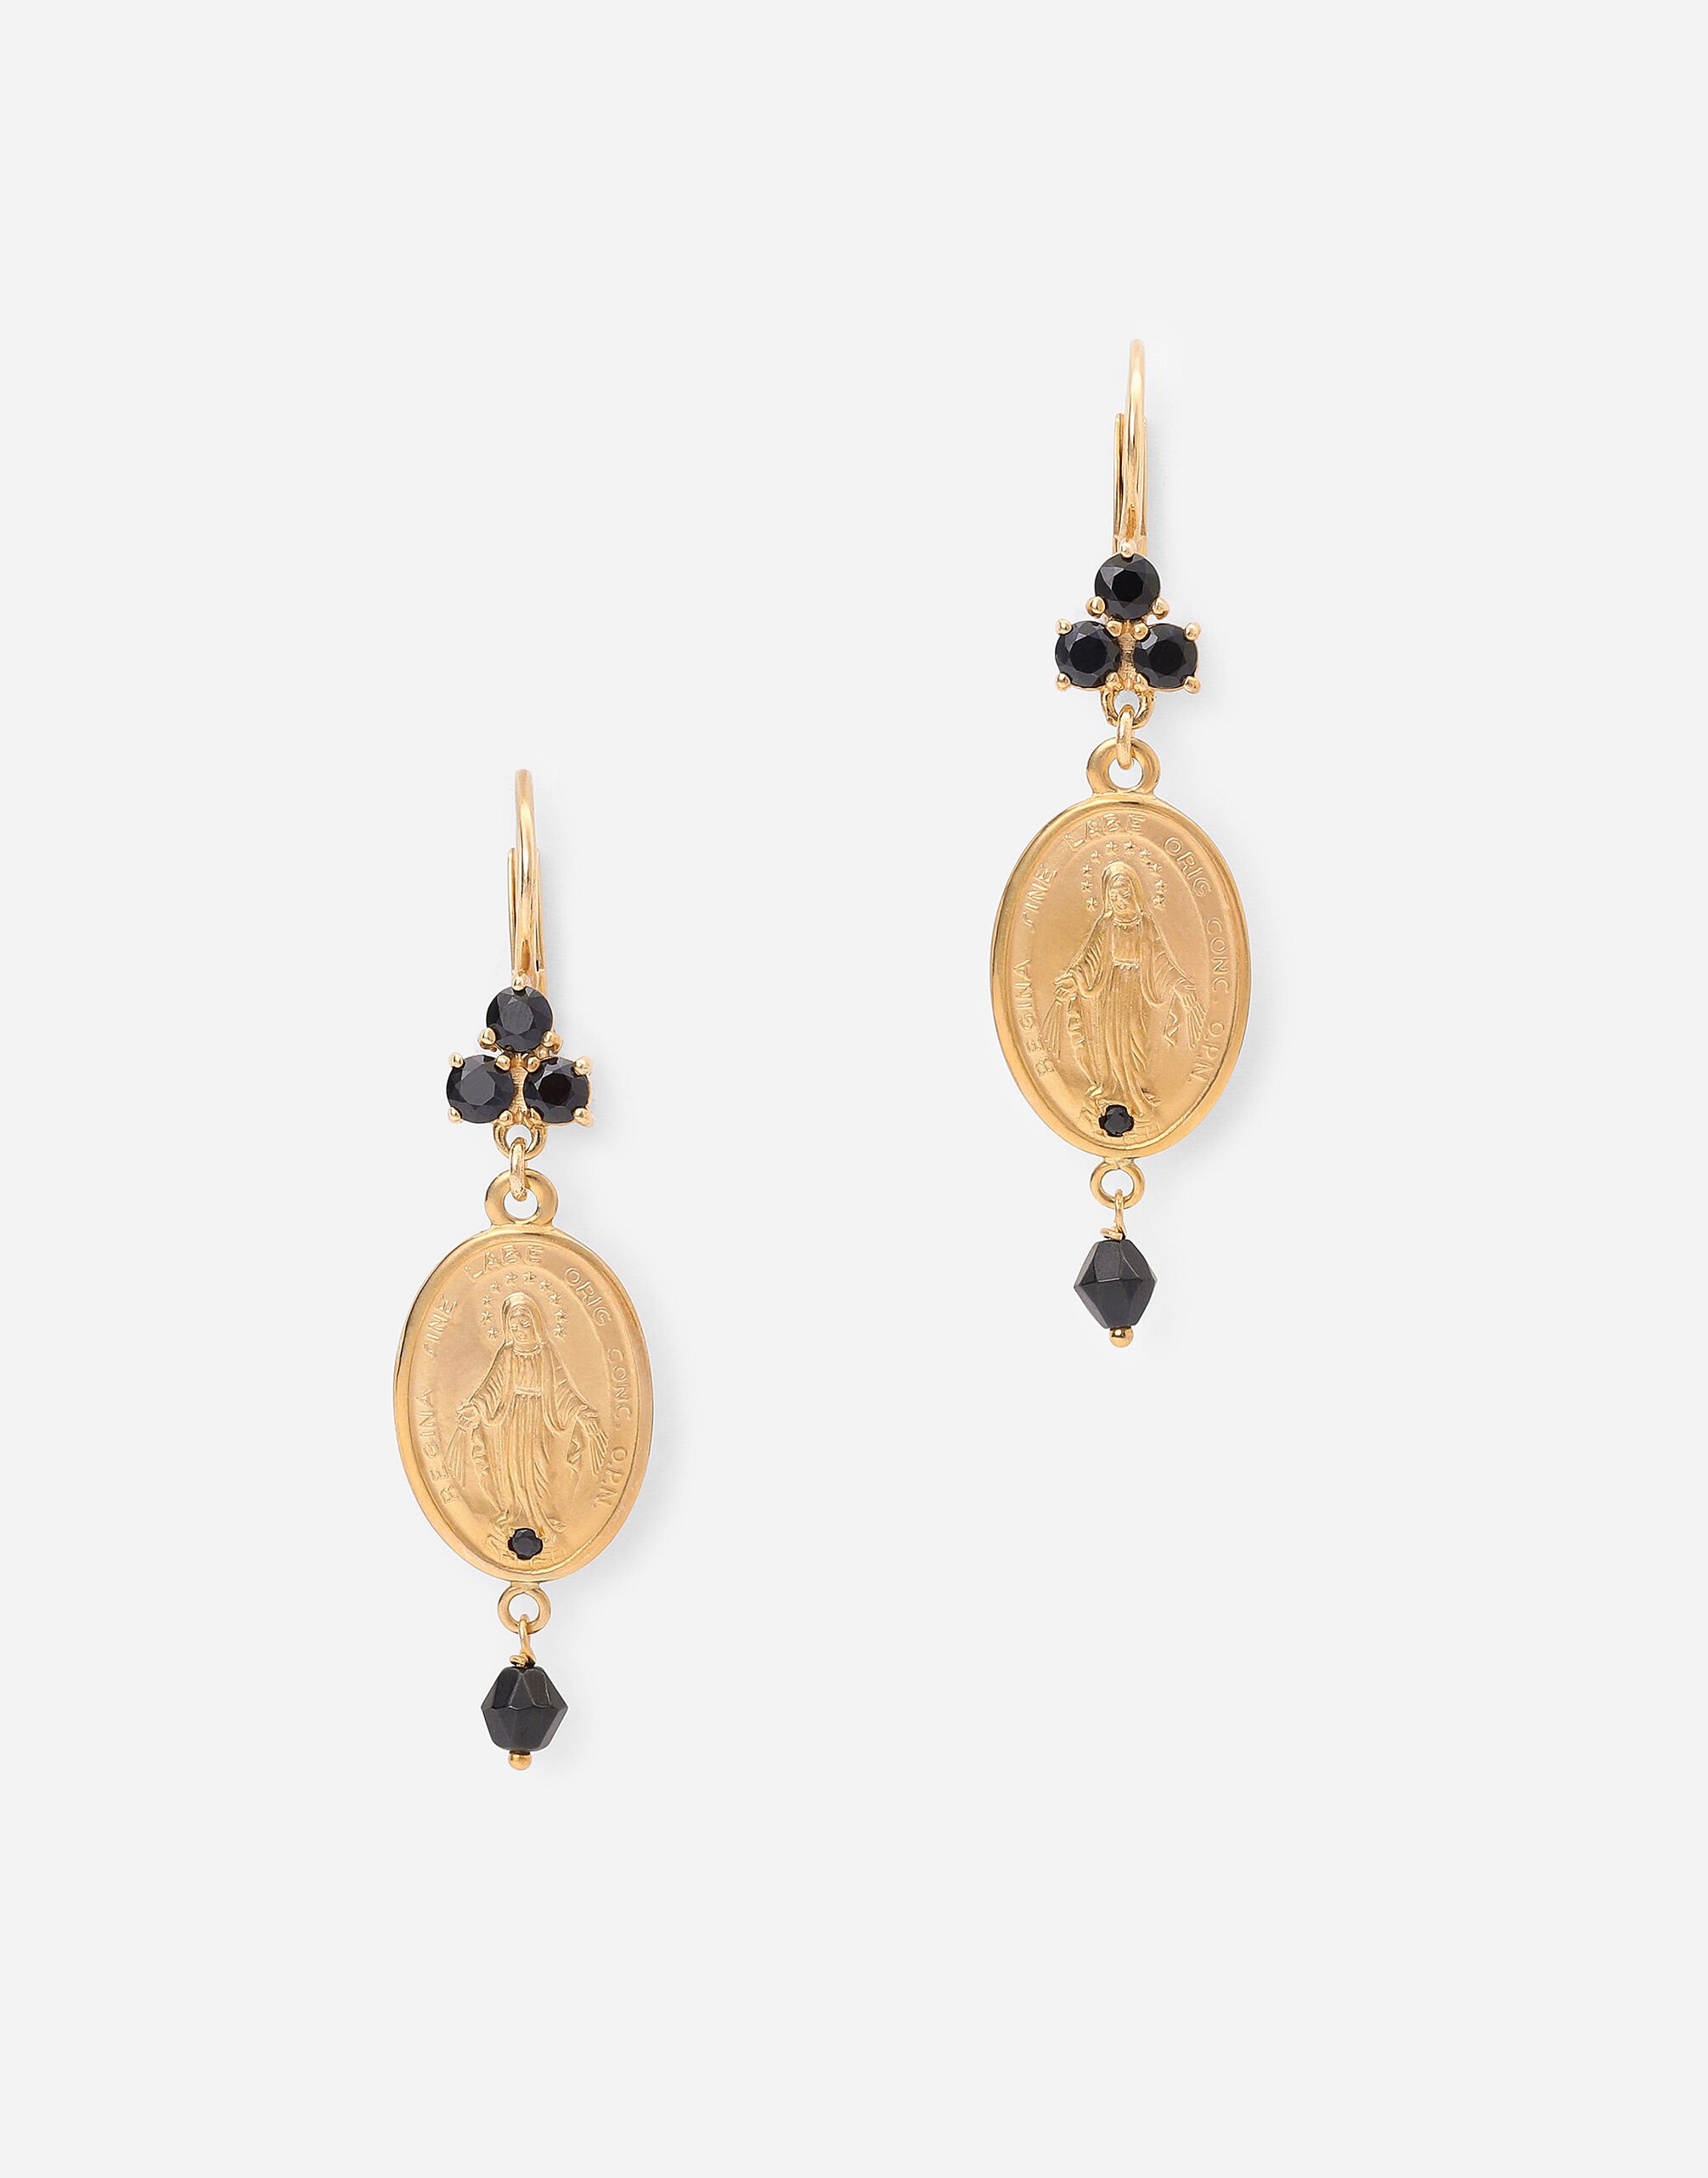 Dolce & Gabbana Tradition earrings in yellow 18kt gold with medals Leo Print WWJC2SXCMDT